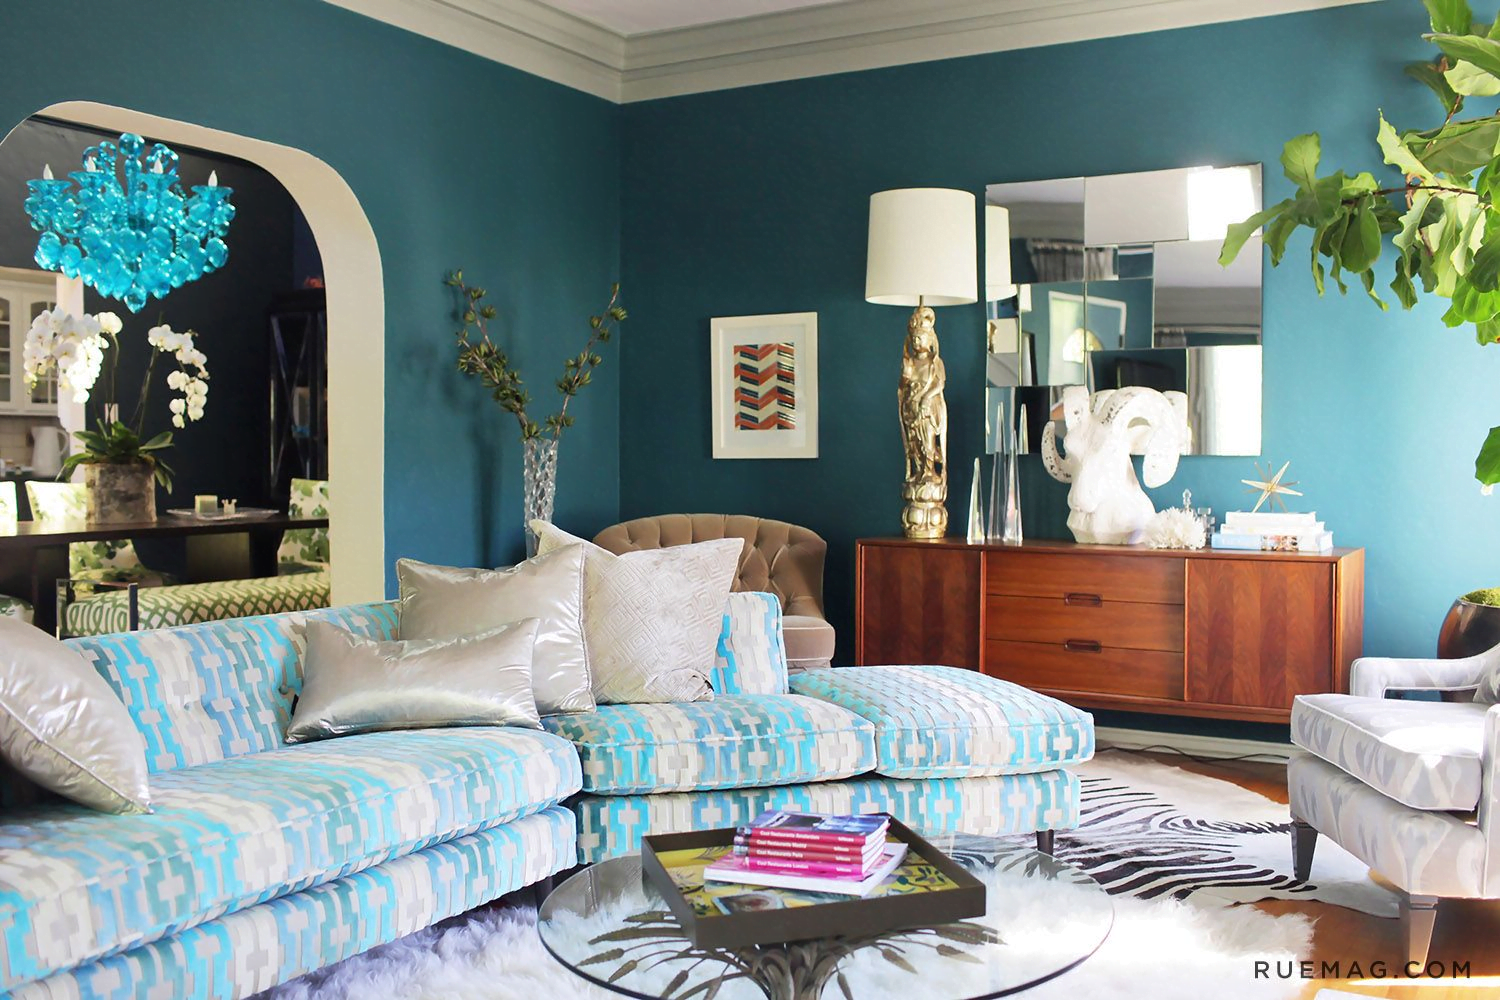 Colors That Go Well With Teal In Your Home Decor